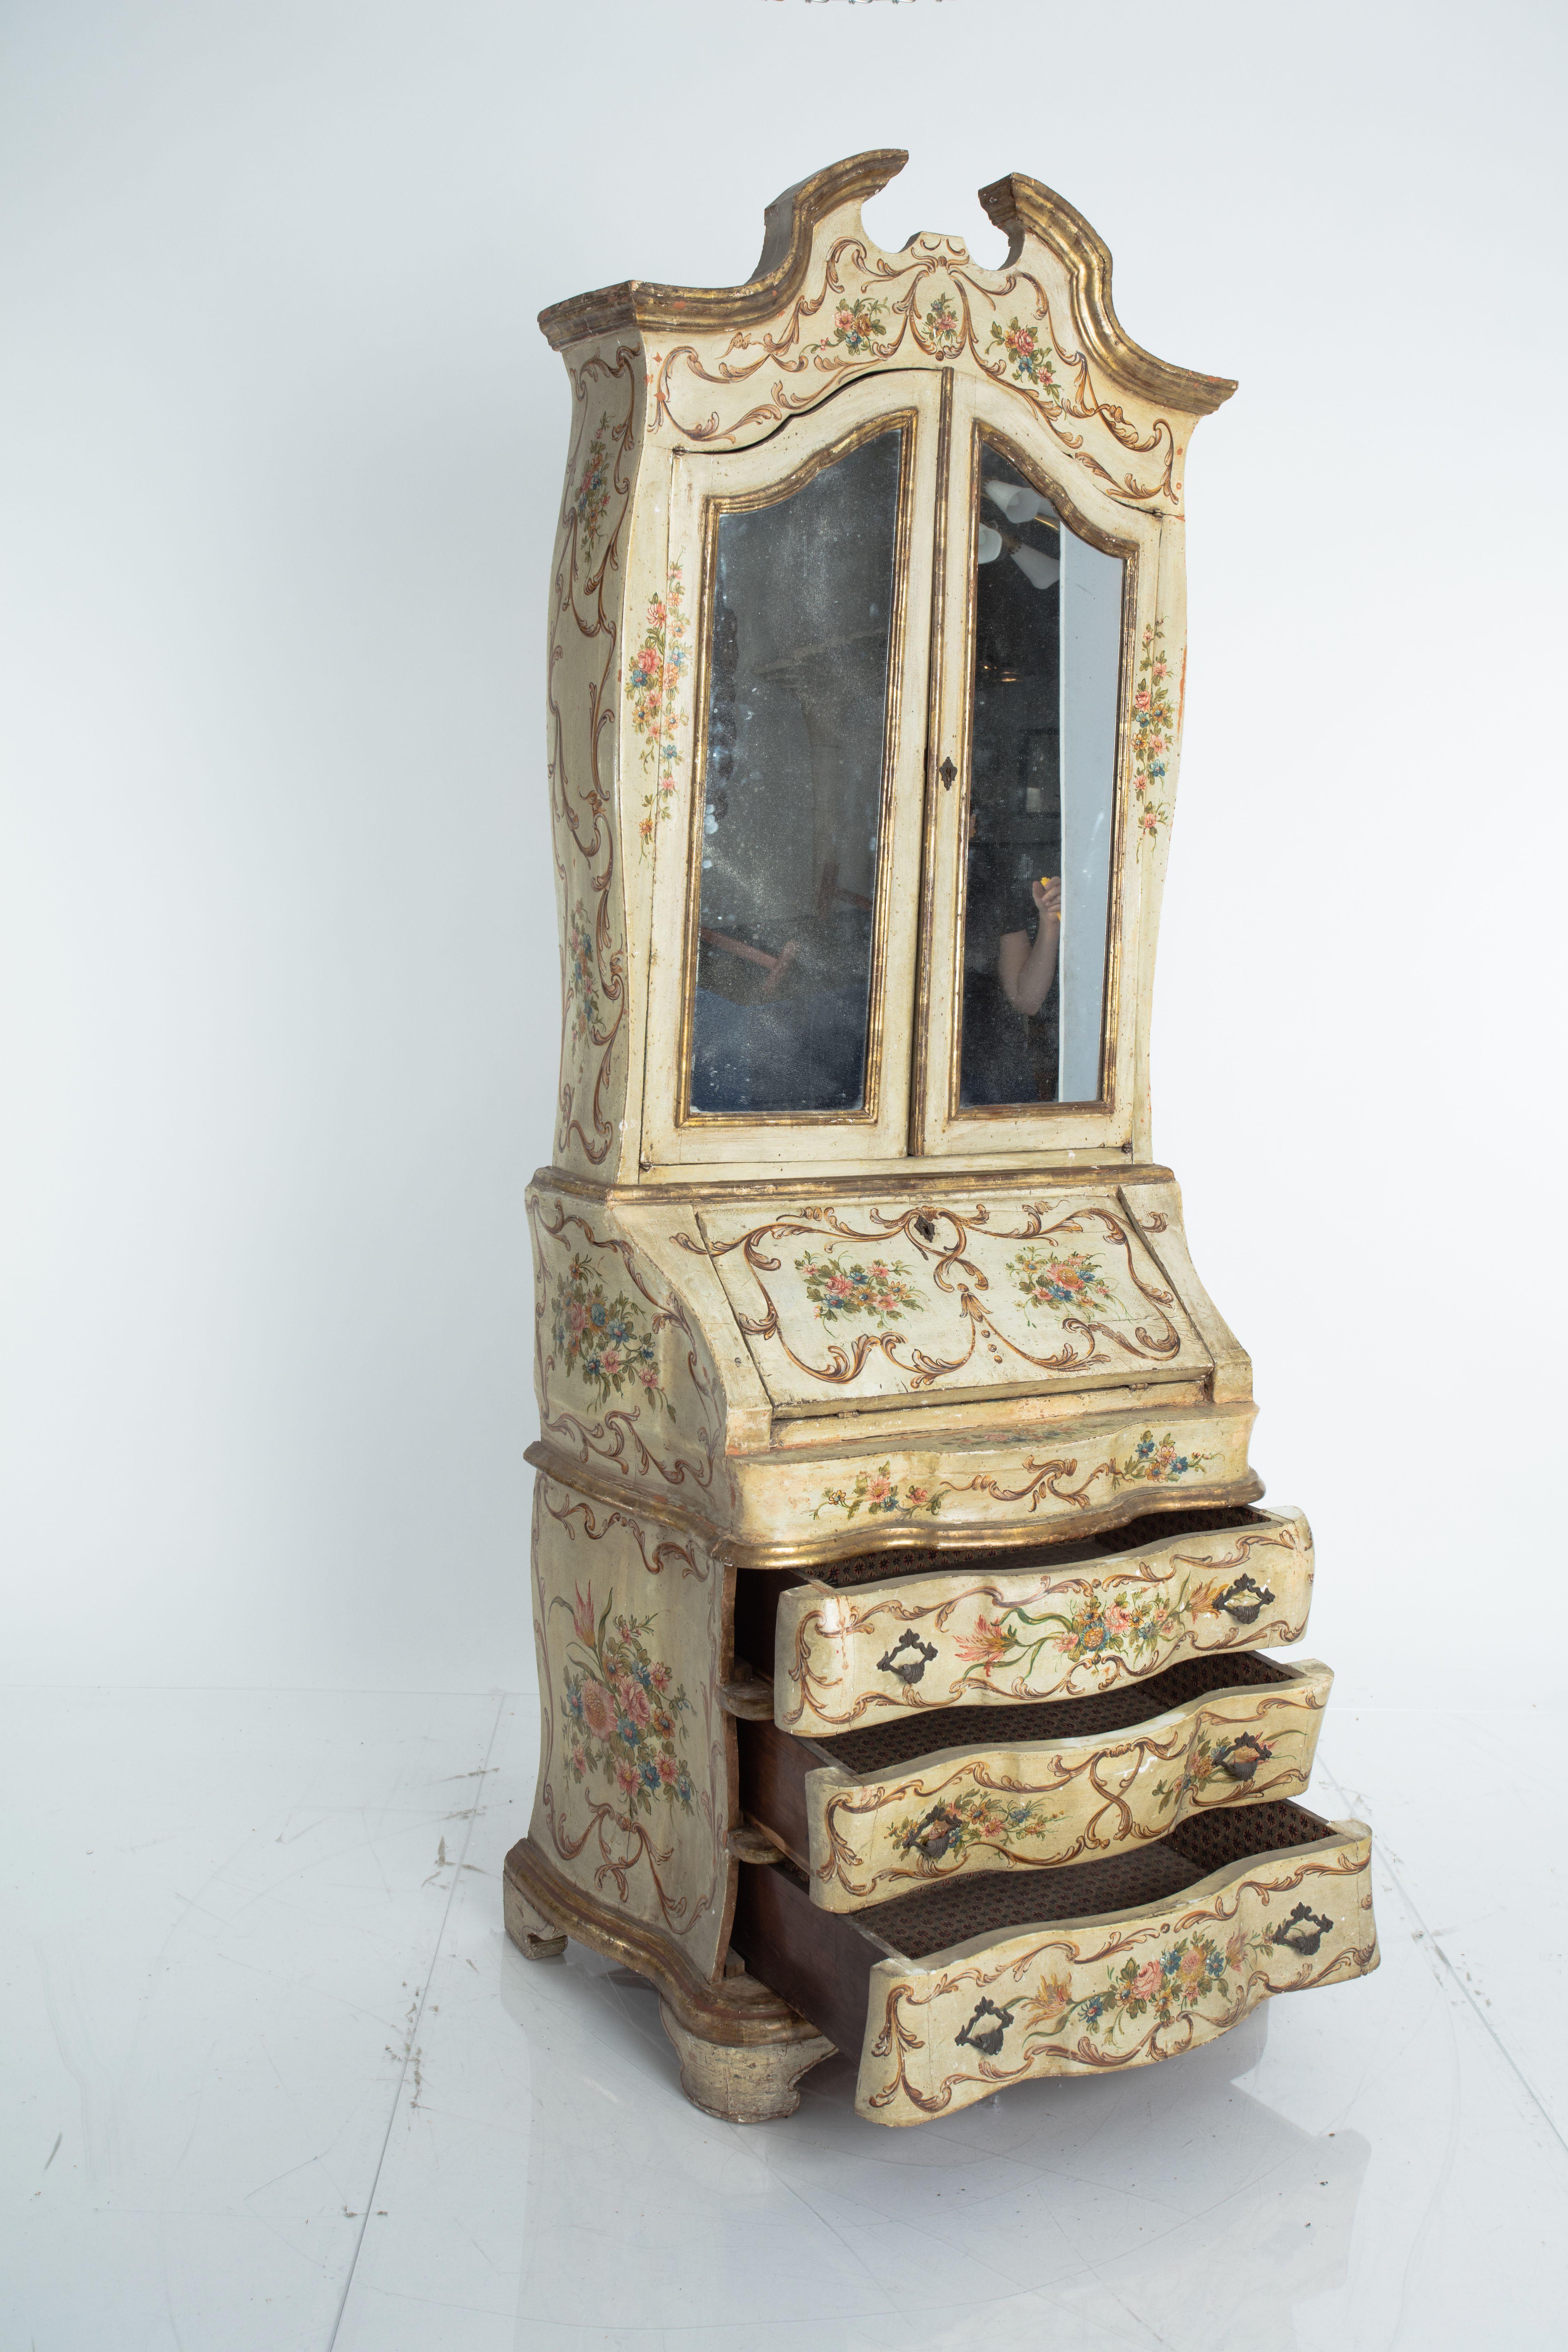 Wood Antique Rococo Style Venetian Secretary Cabinet with Gilt and Floral Motif